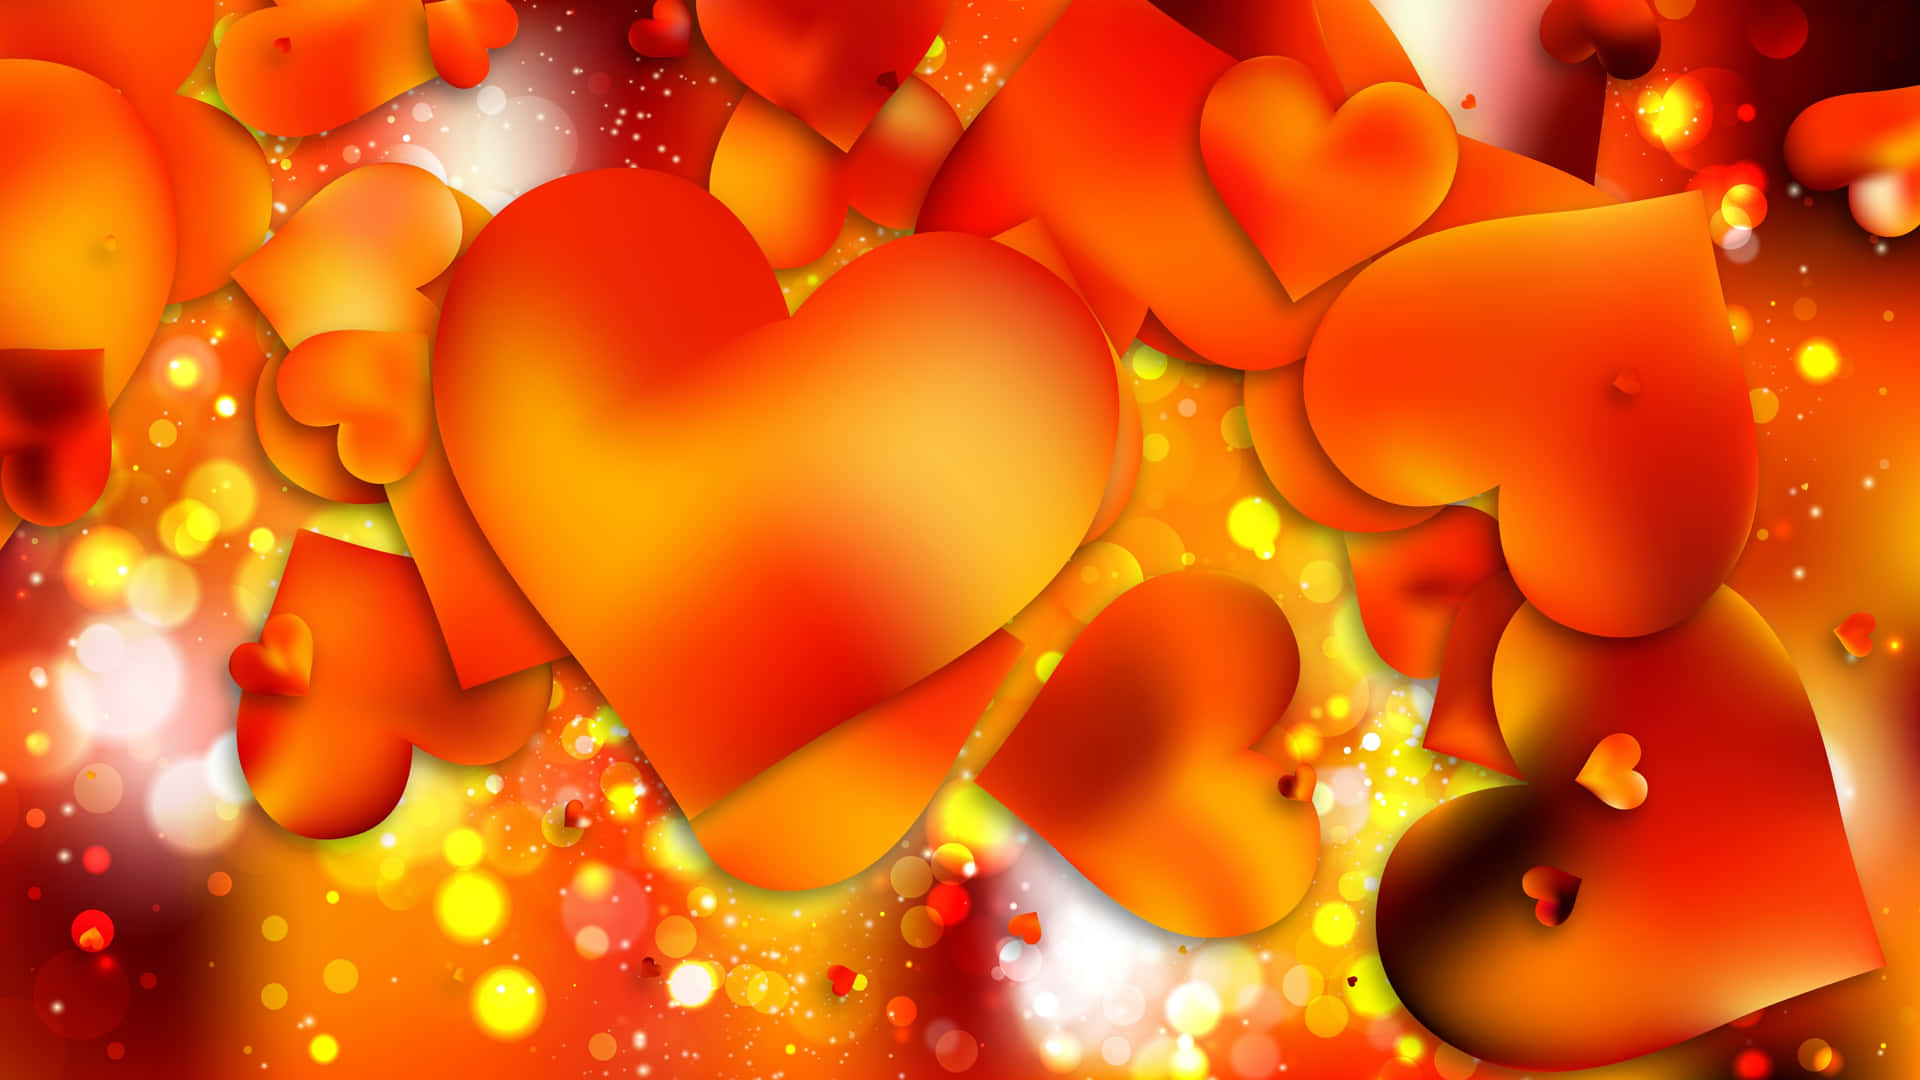 Orange Heart on a Colorful Background Wallpaper